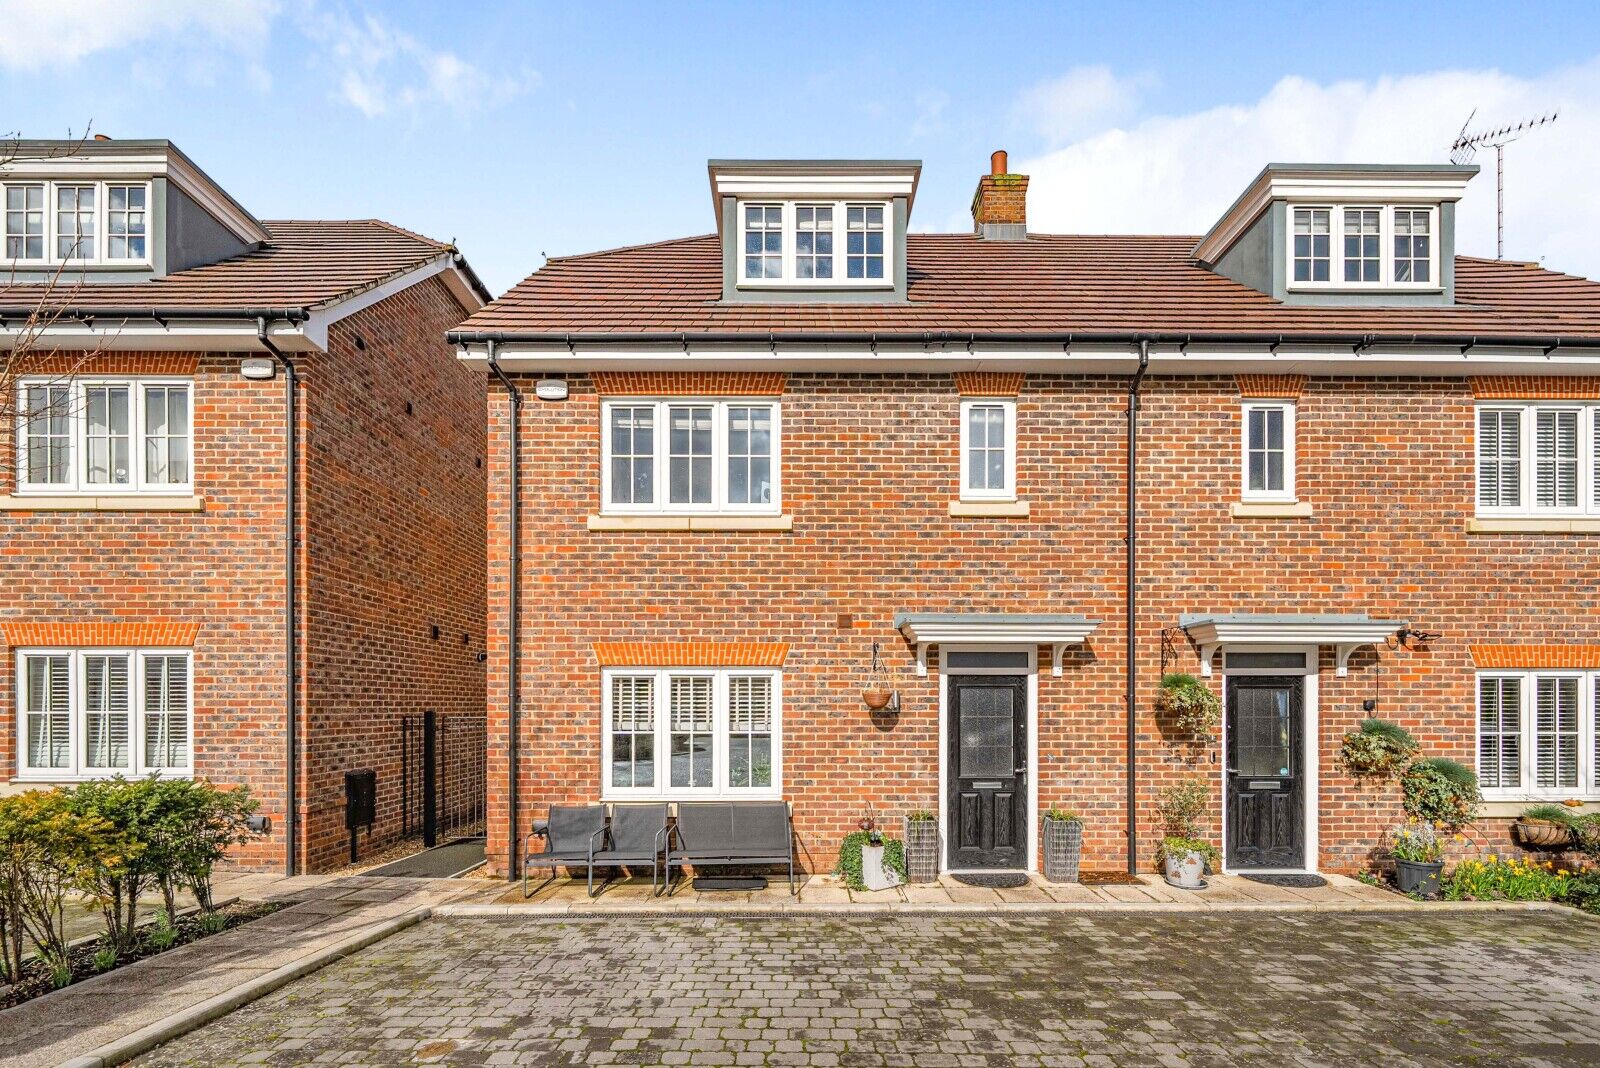 4 bedroom end terraced house for sale Oakford Court, Henley-on-Thames, RG9, main image